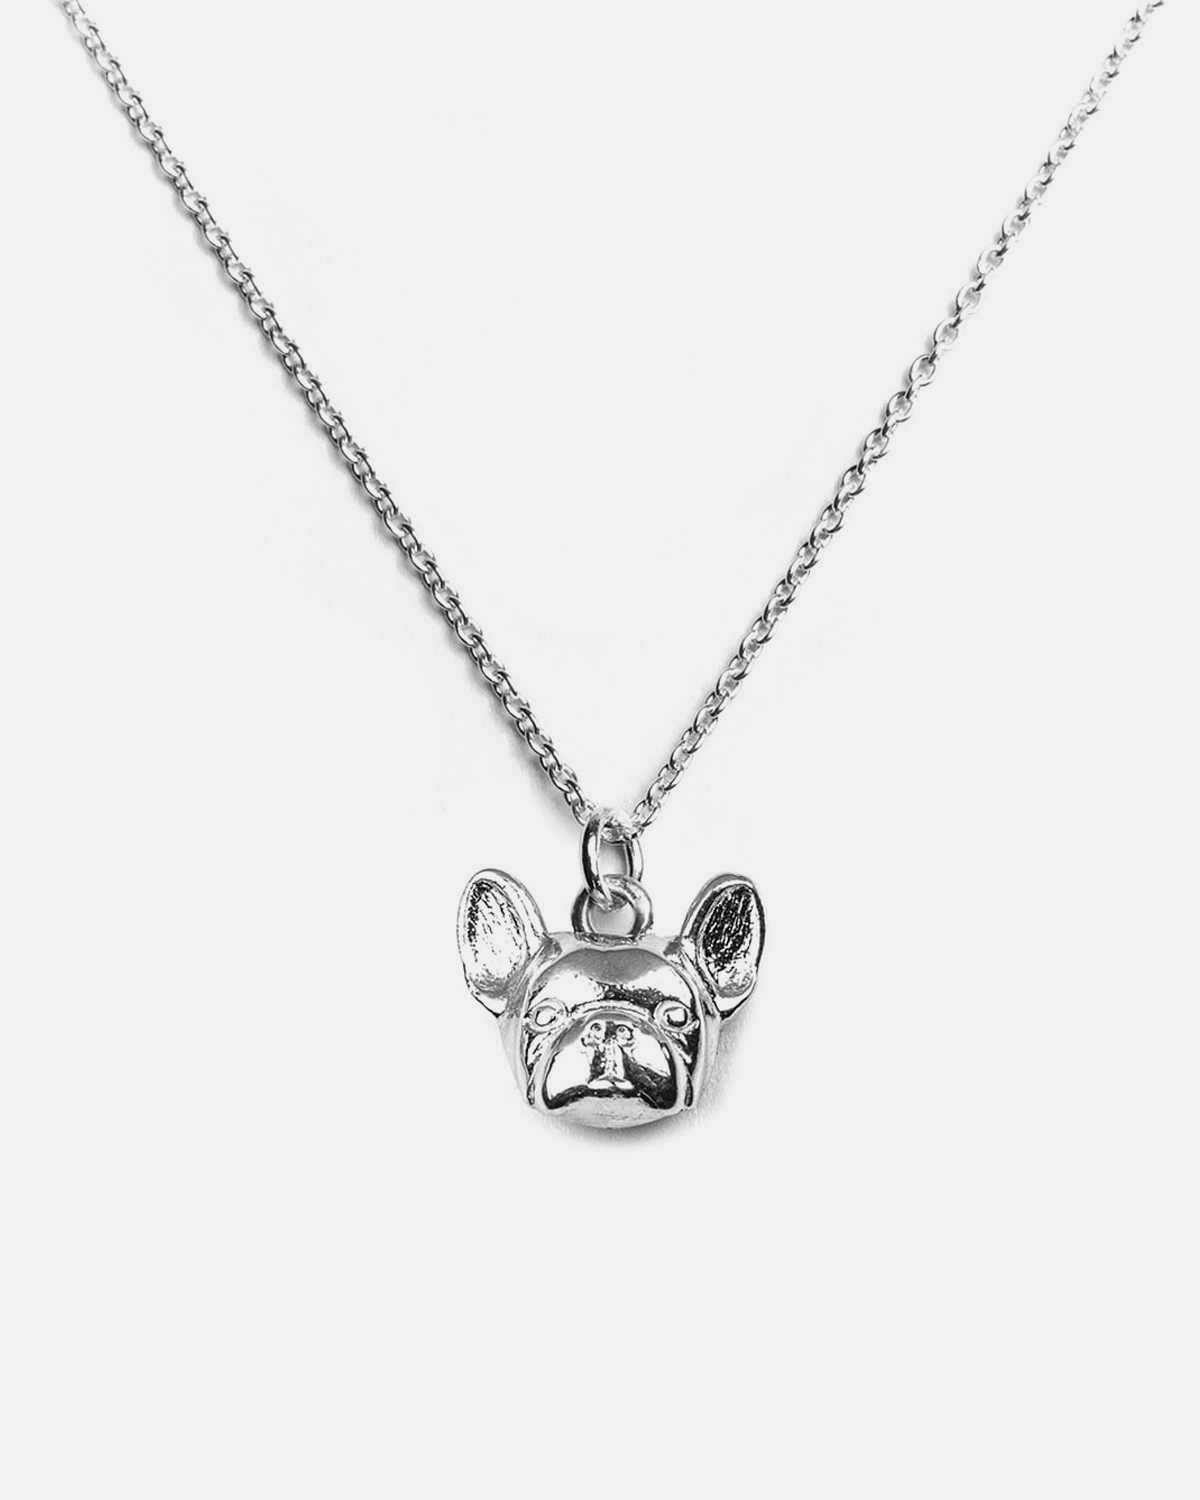 925 Sterling Silver French Bulldog Pendant Necklace Chain Included